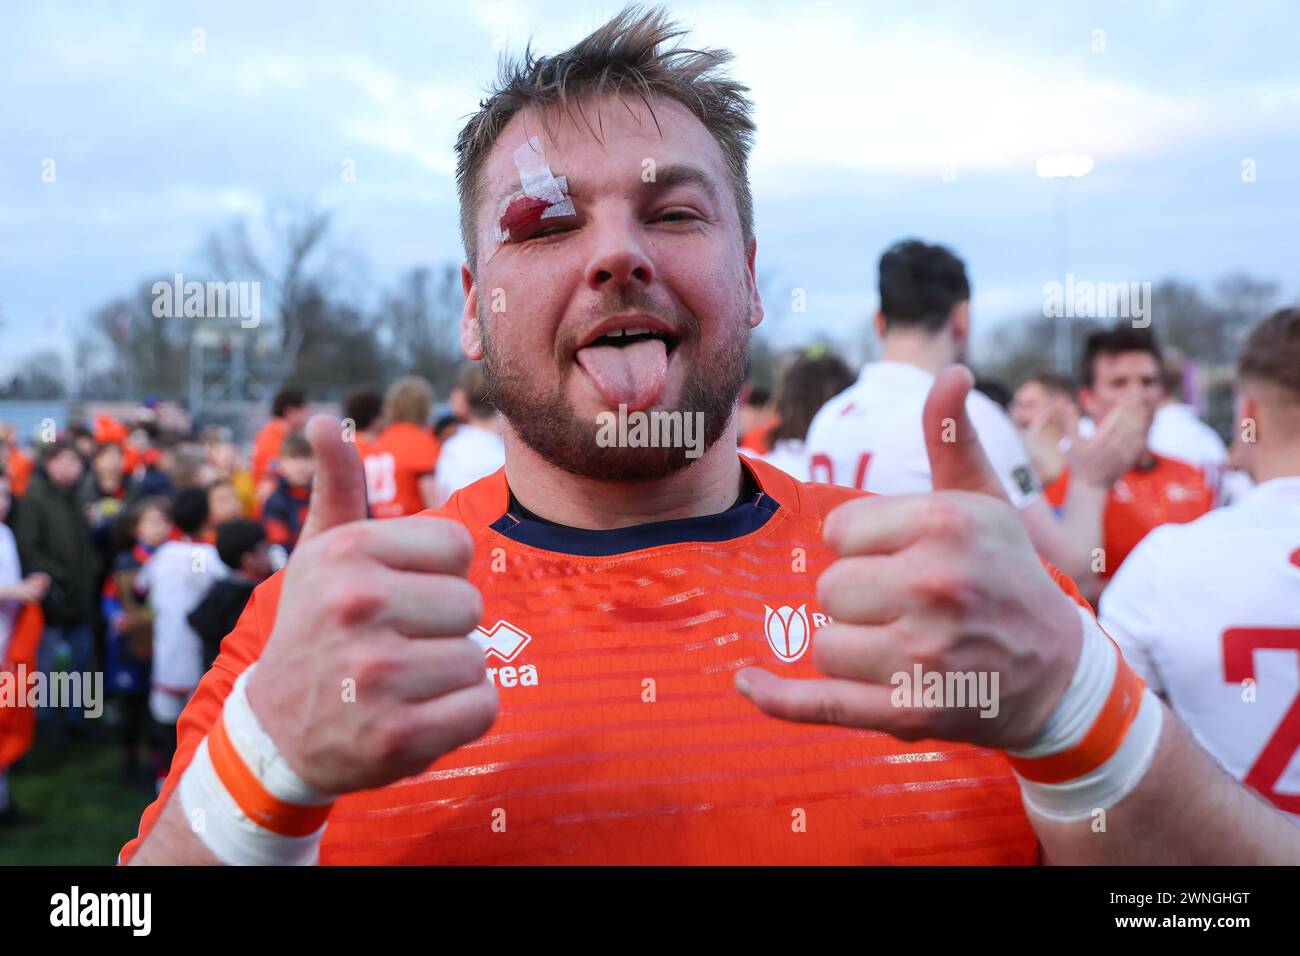 AMSTERDAM, NETHERLANDS - MARCH 02: David Anderson player of Haagsche RC during the international Rugby Europe Championship match between The Netherlan Stock Photo